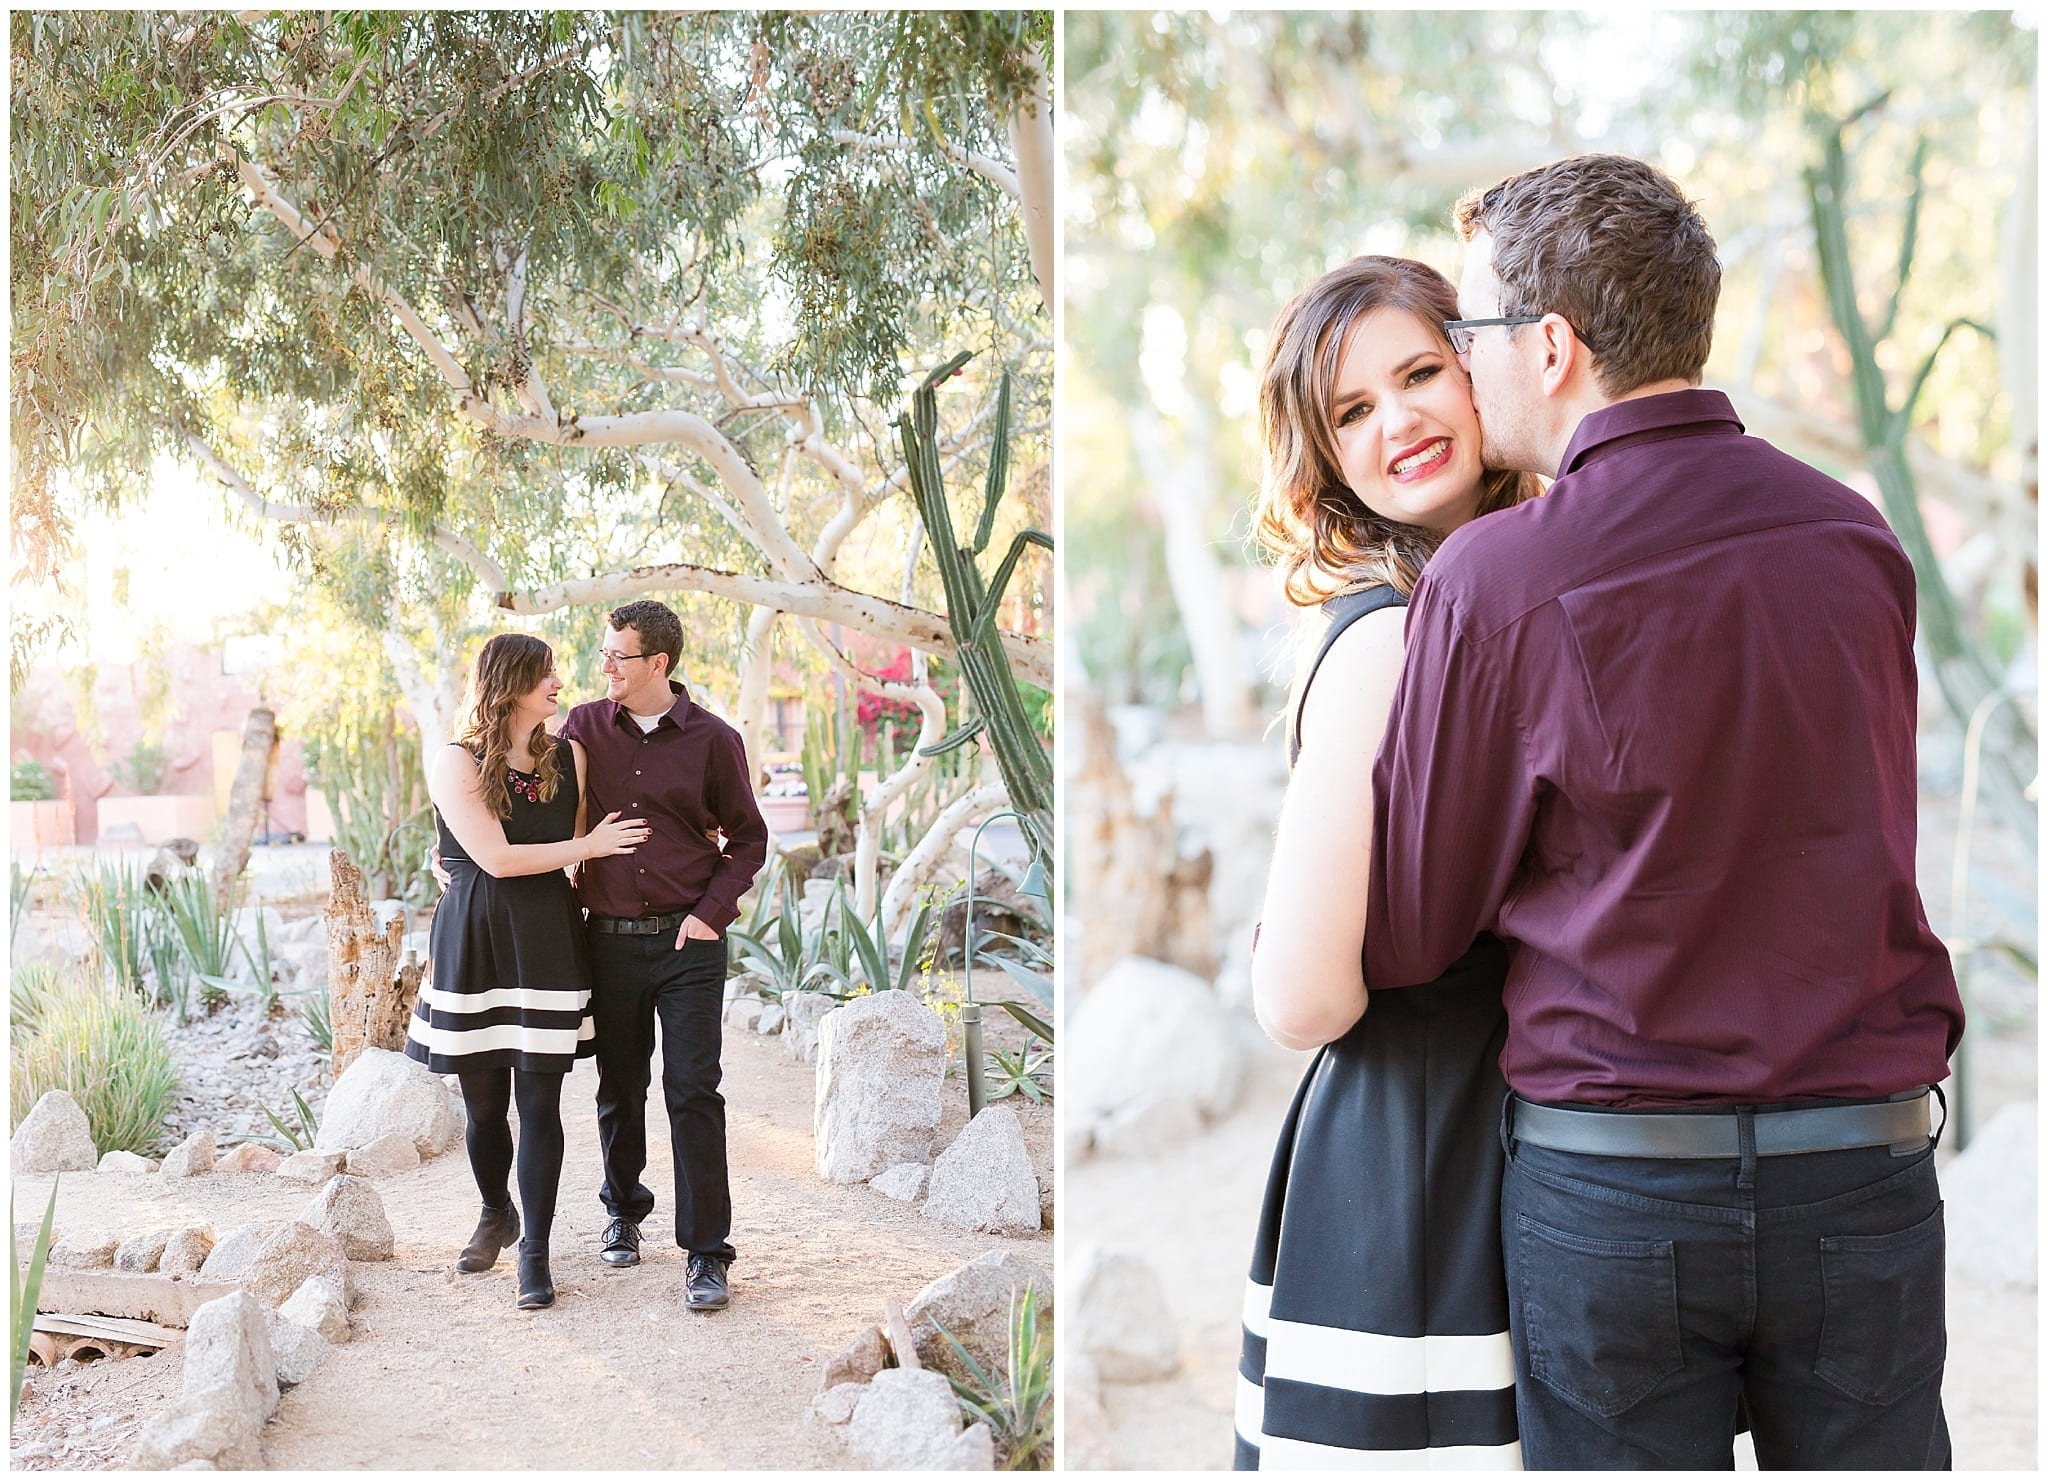 A Boojum Tree Engagement Session